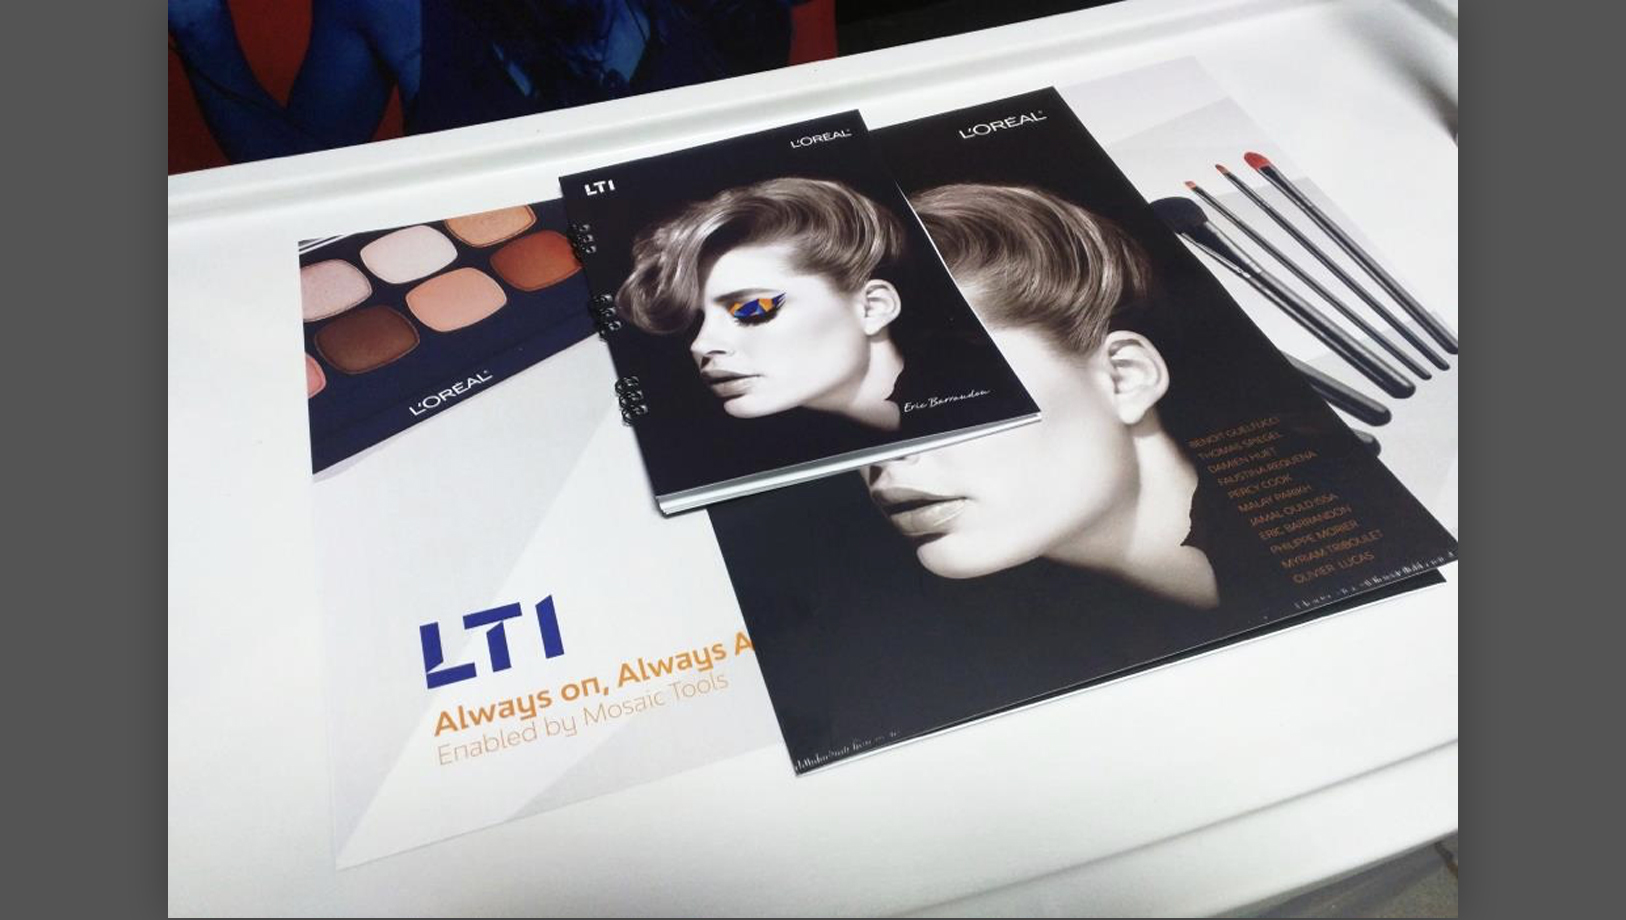 LTI loreal visit with live painting